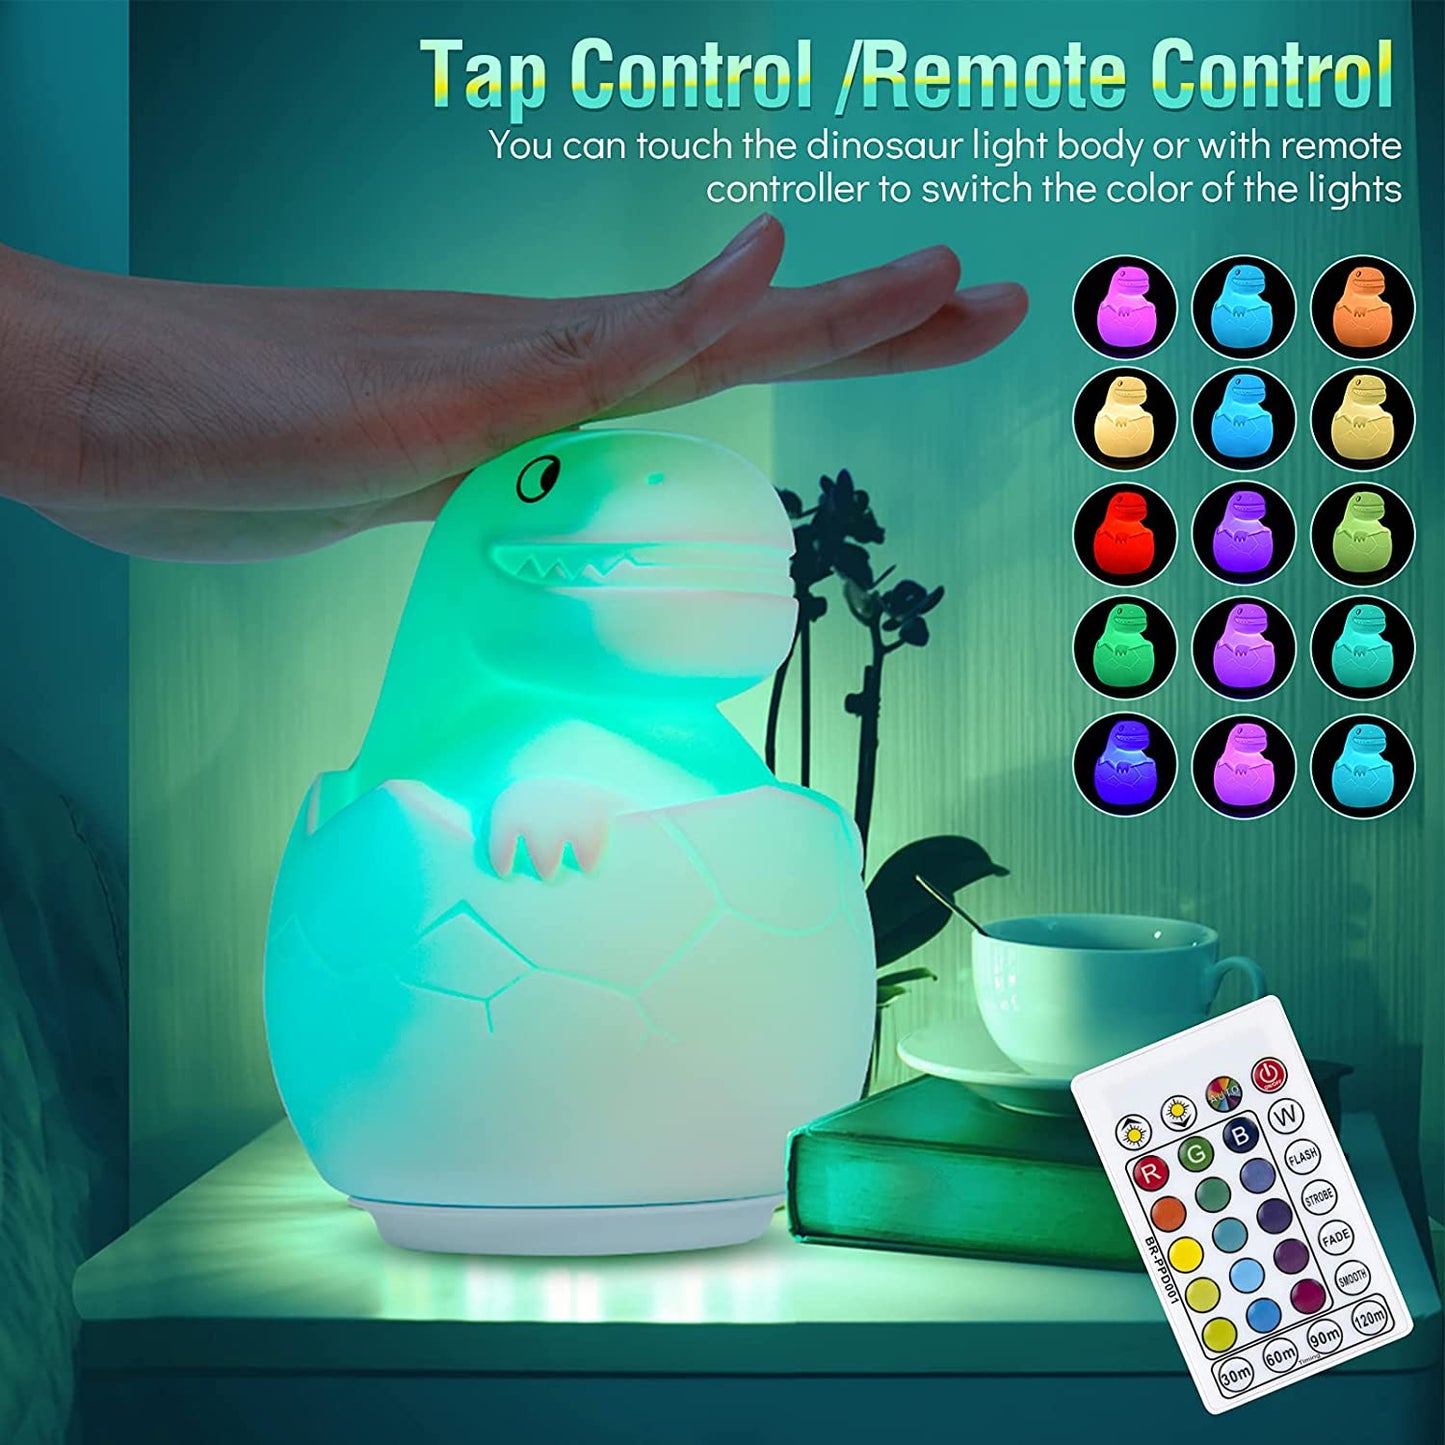 Dinosaur Night Light for Kids Room, BIRUI Cute Dino Lamp Boys Toddler Birthday Gifts Color Changing Battery for Girls Baby Nursery, Portable Squishy Silicon beside Lamp for Children Bedroom (Modern)